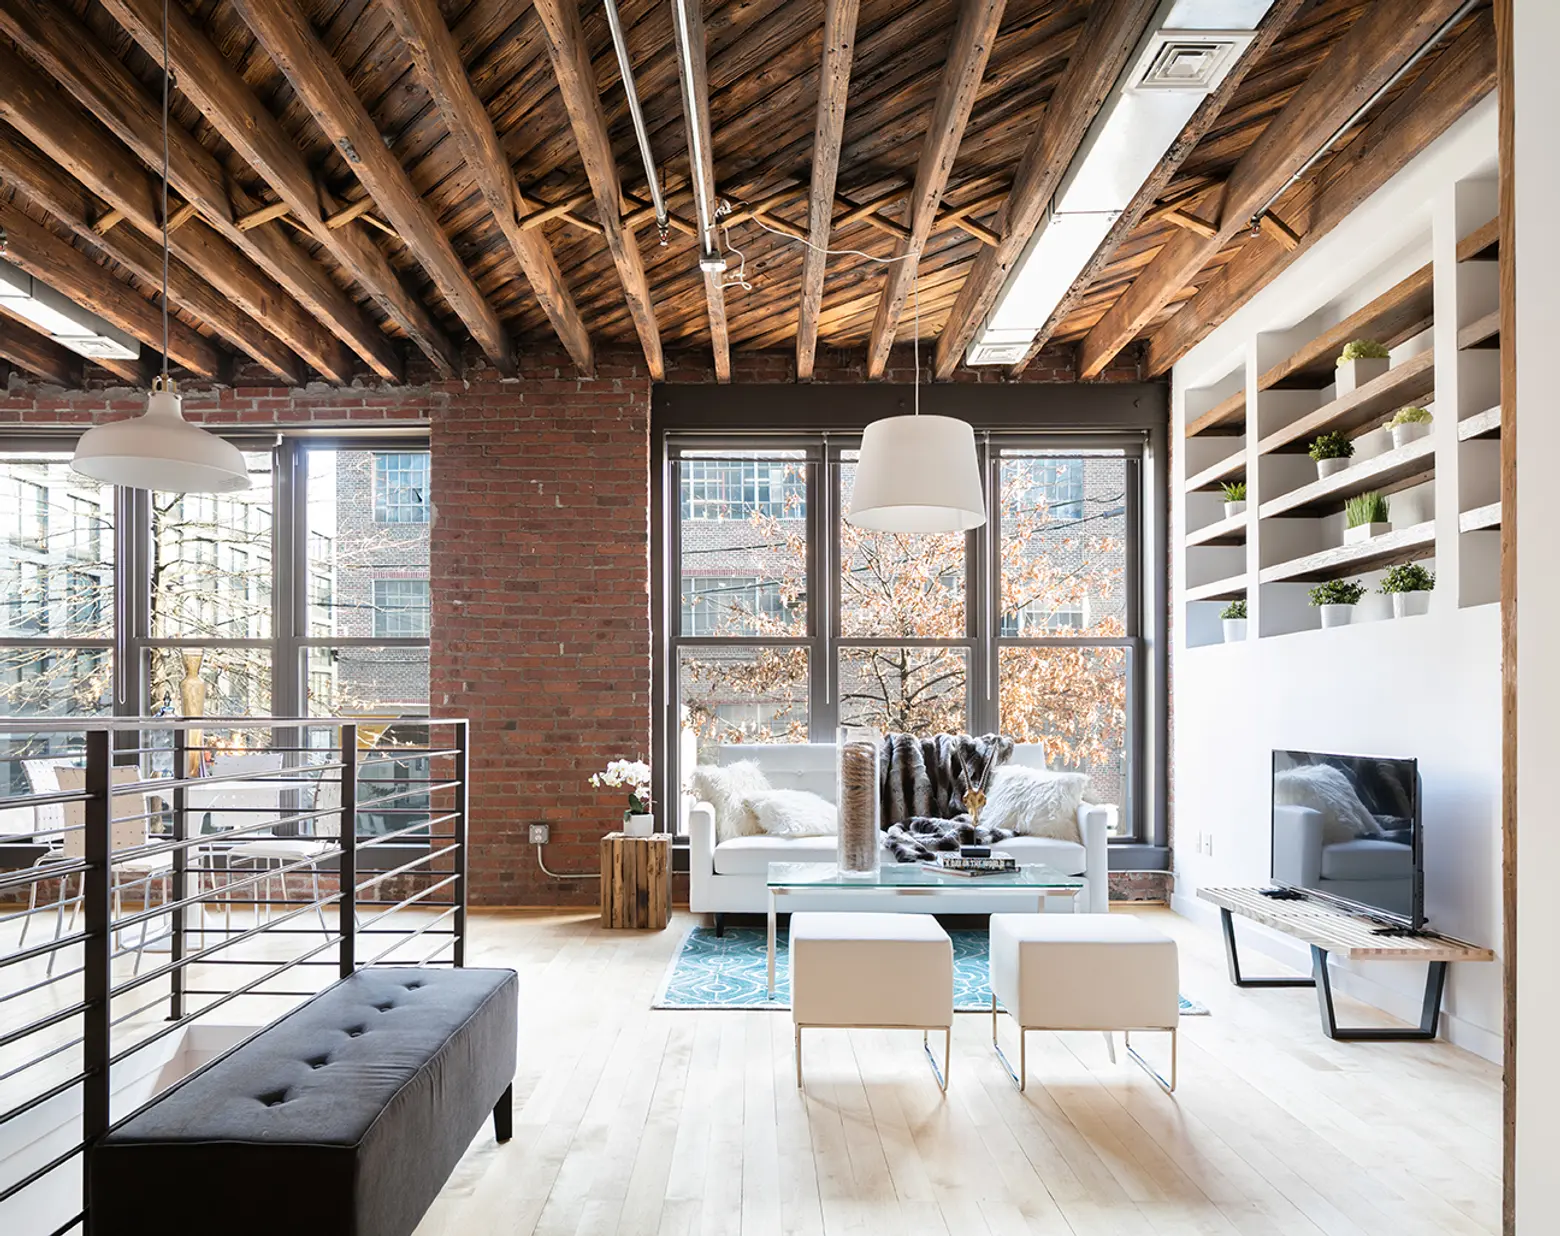 From a Former Babka Bakery Comes This Duplex Condo With the Original Timber Beams Intact